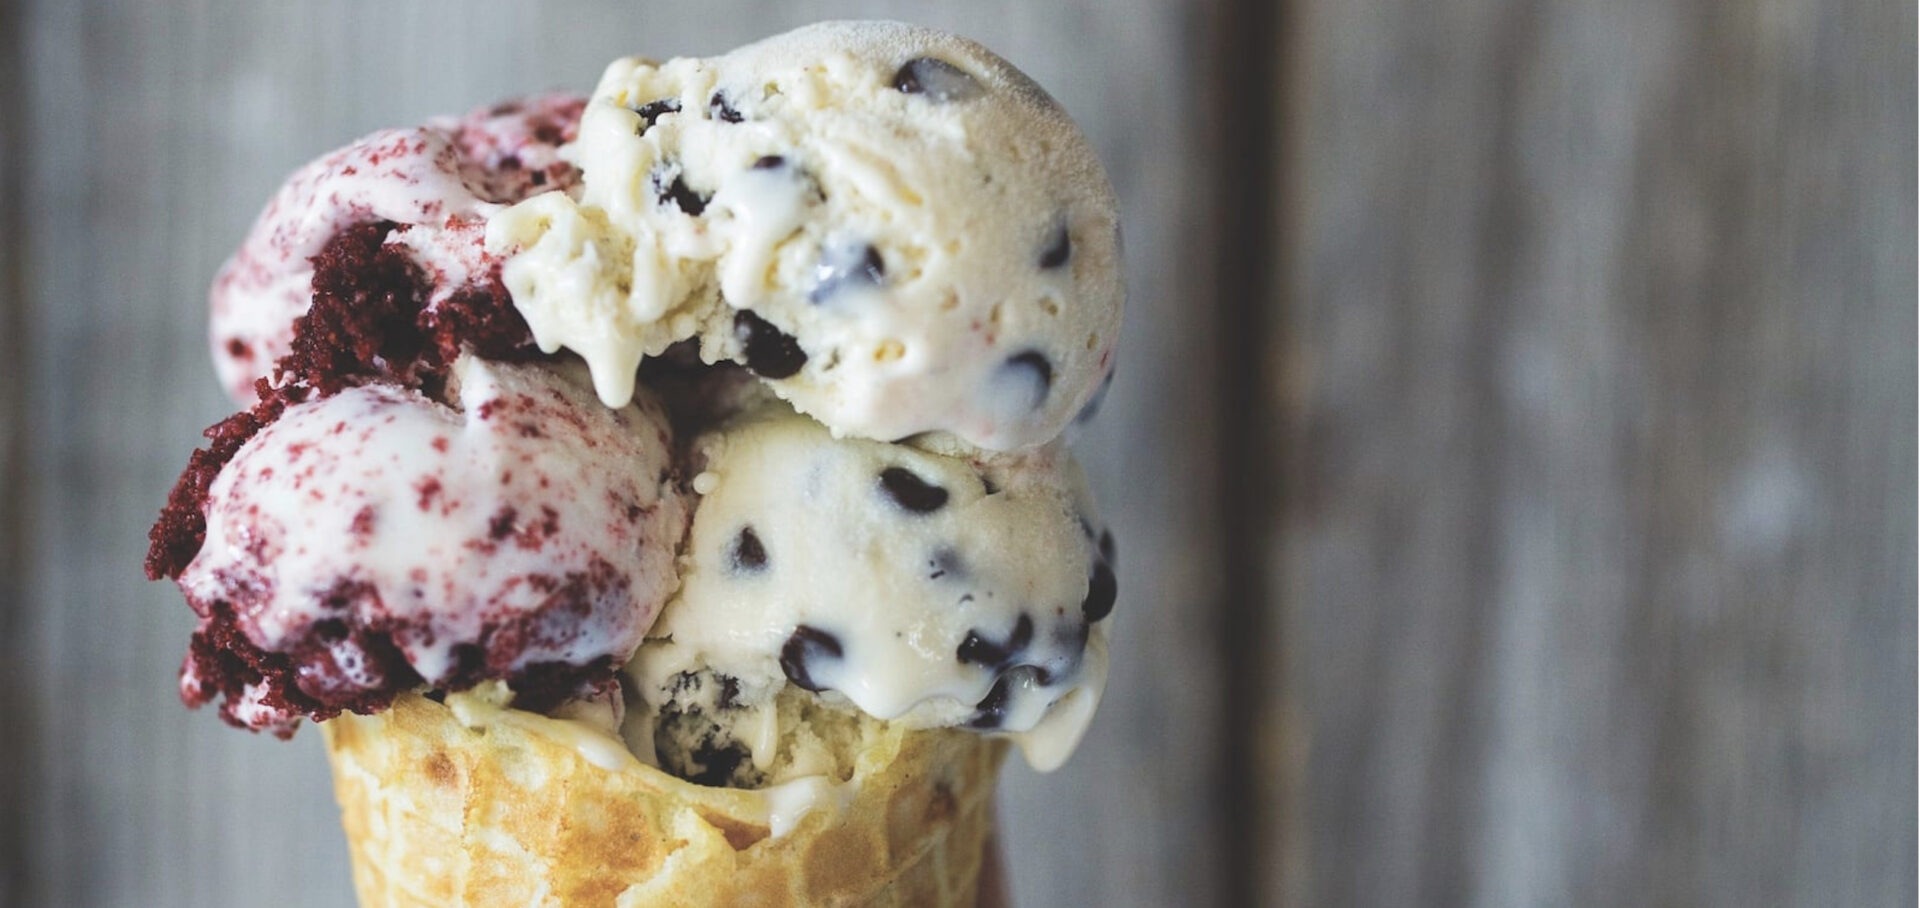 Chocolate chip and red velvet gelato in a cone, one of five no bake dessert options